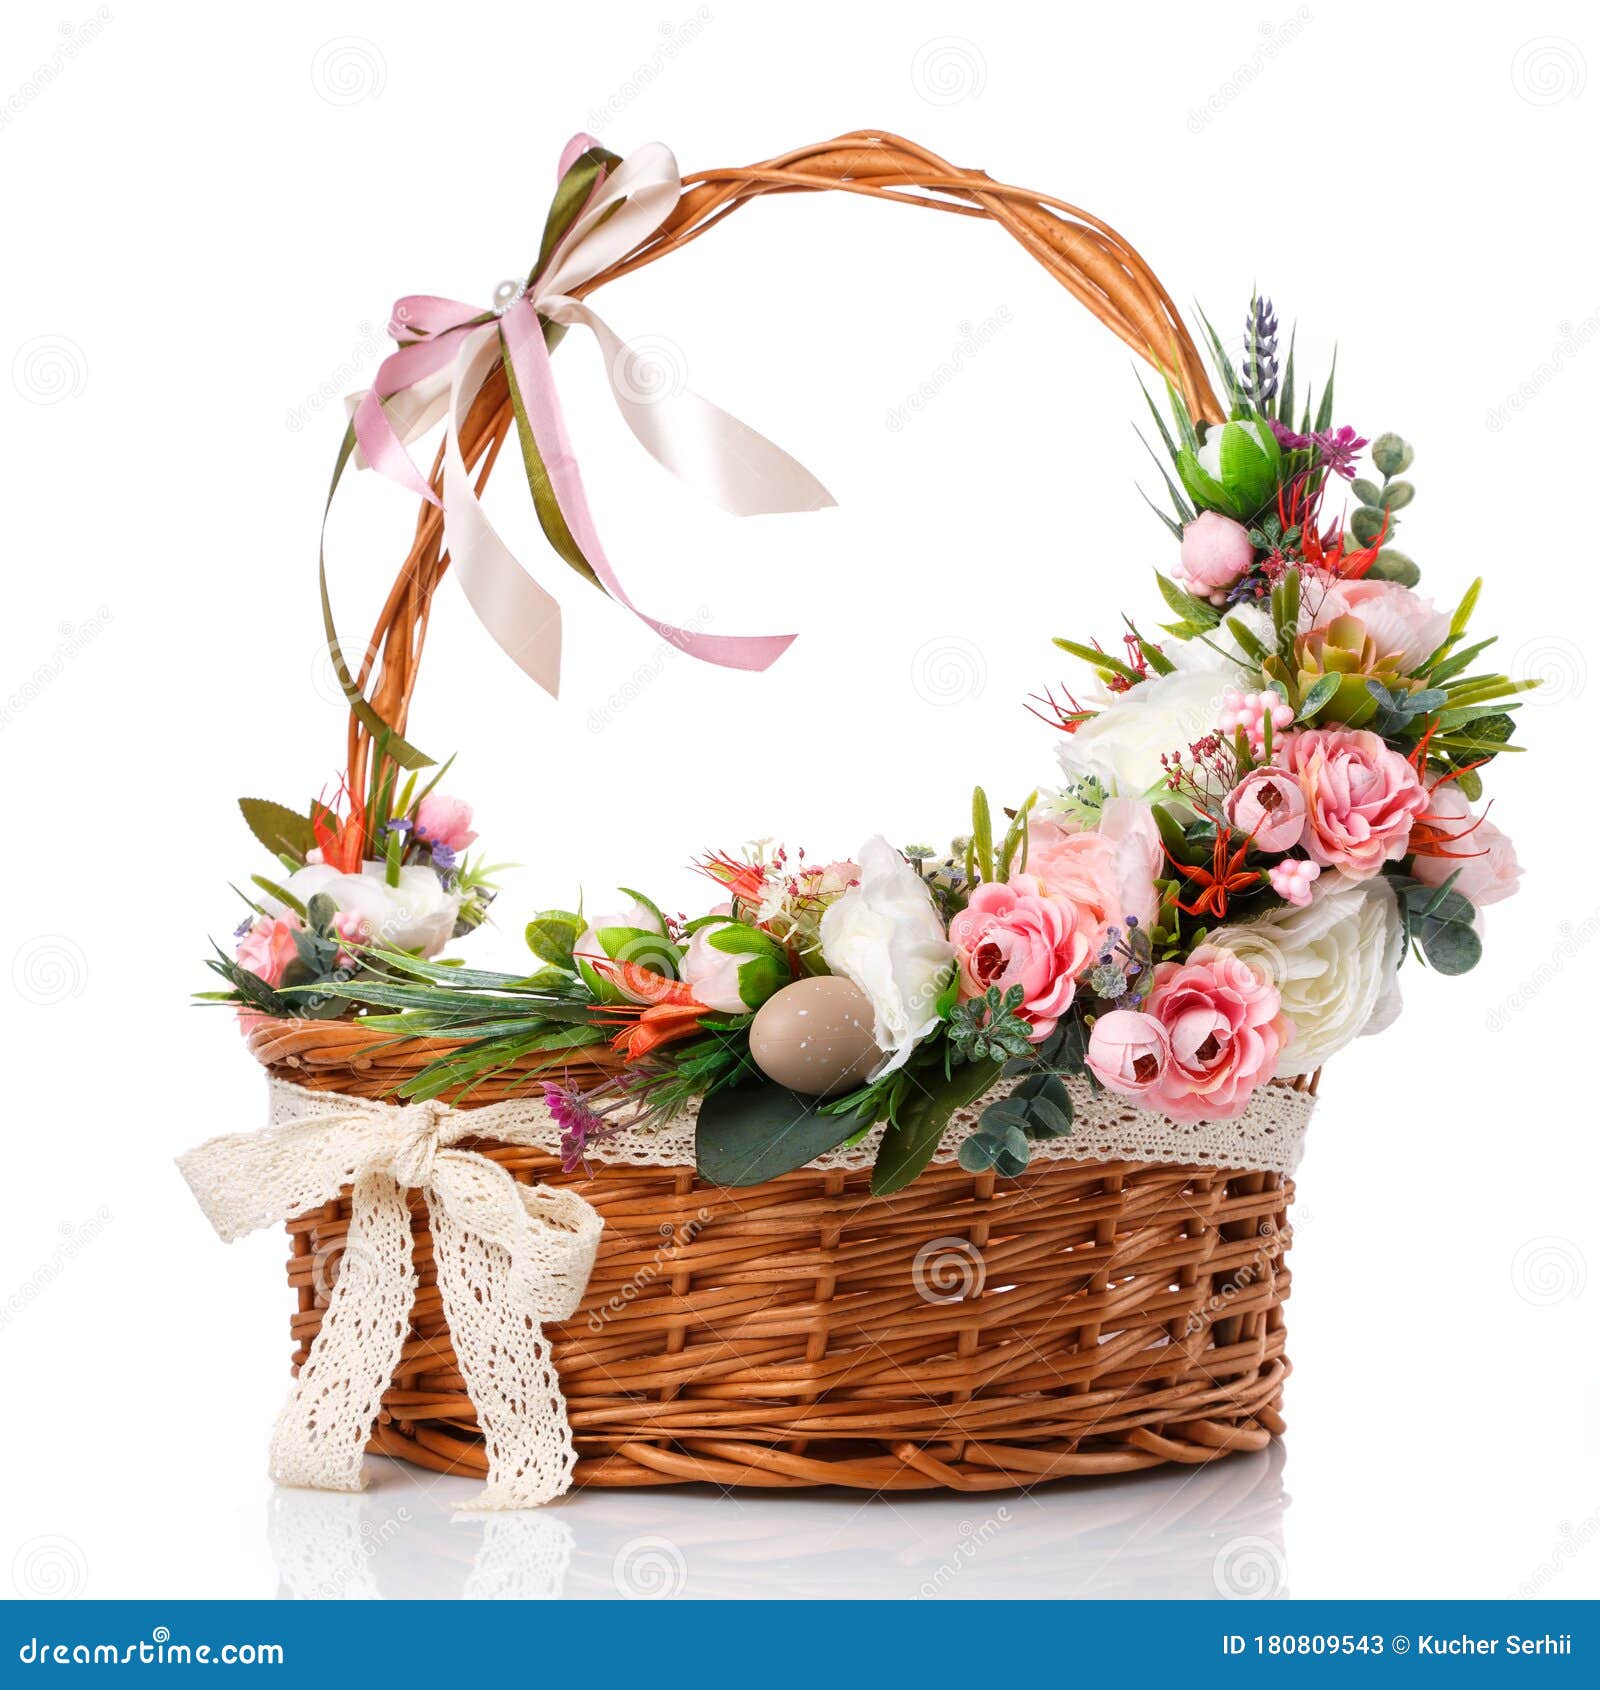 Easter Basket. Brown Wicker Basket With Colorful Floral